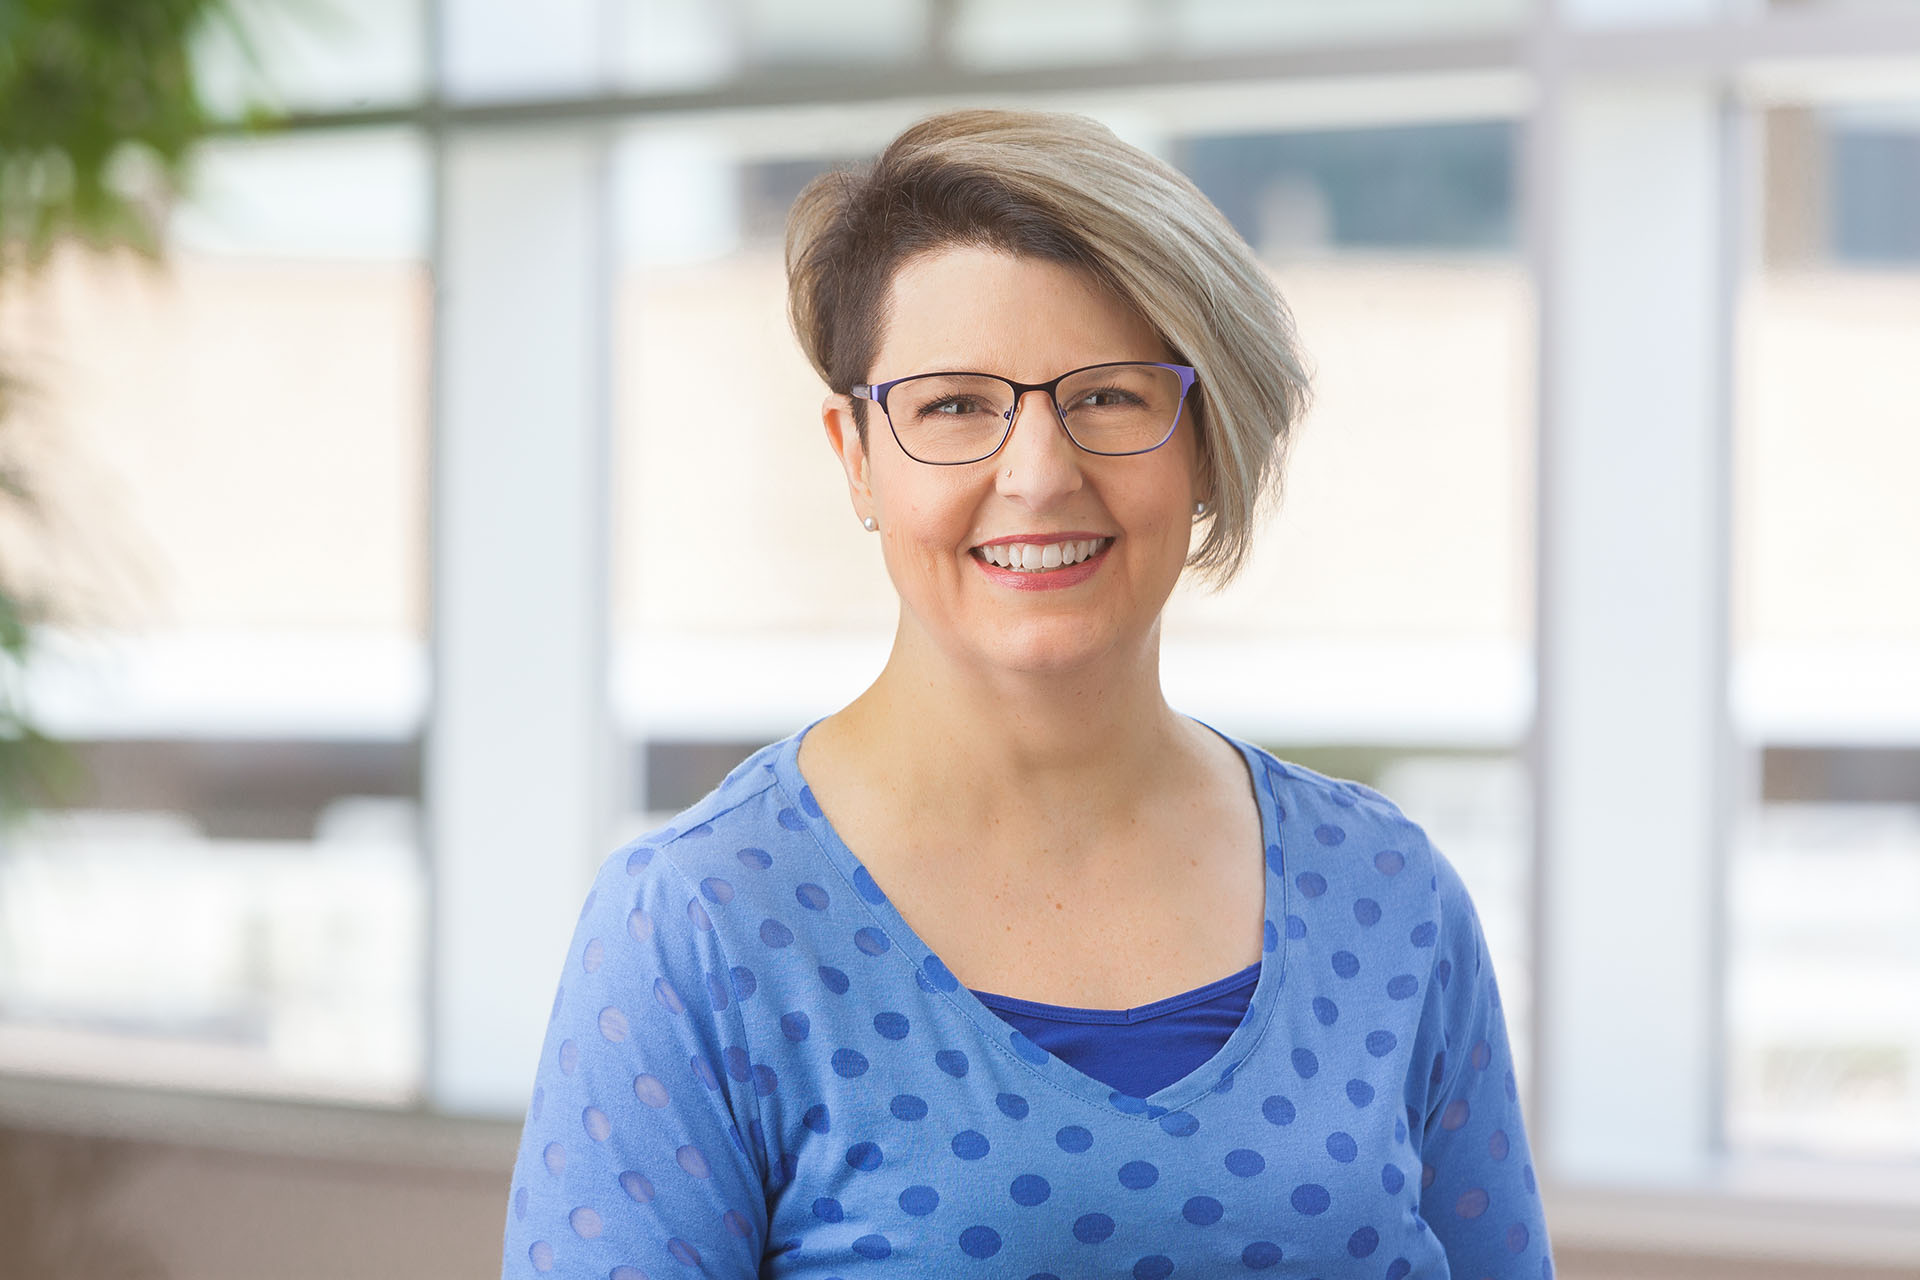 Meg Trewhitt&comma; nurse practitioner at the Fred & Pamela Buffett Cancer Center&comma; is among the speakers at a webinar series organized by the Nebraska Collaborative Investment in Nurses&period;